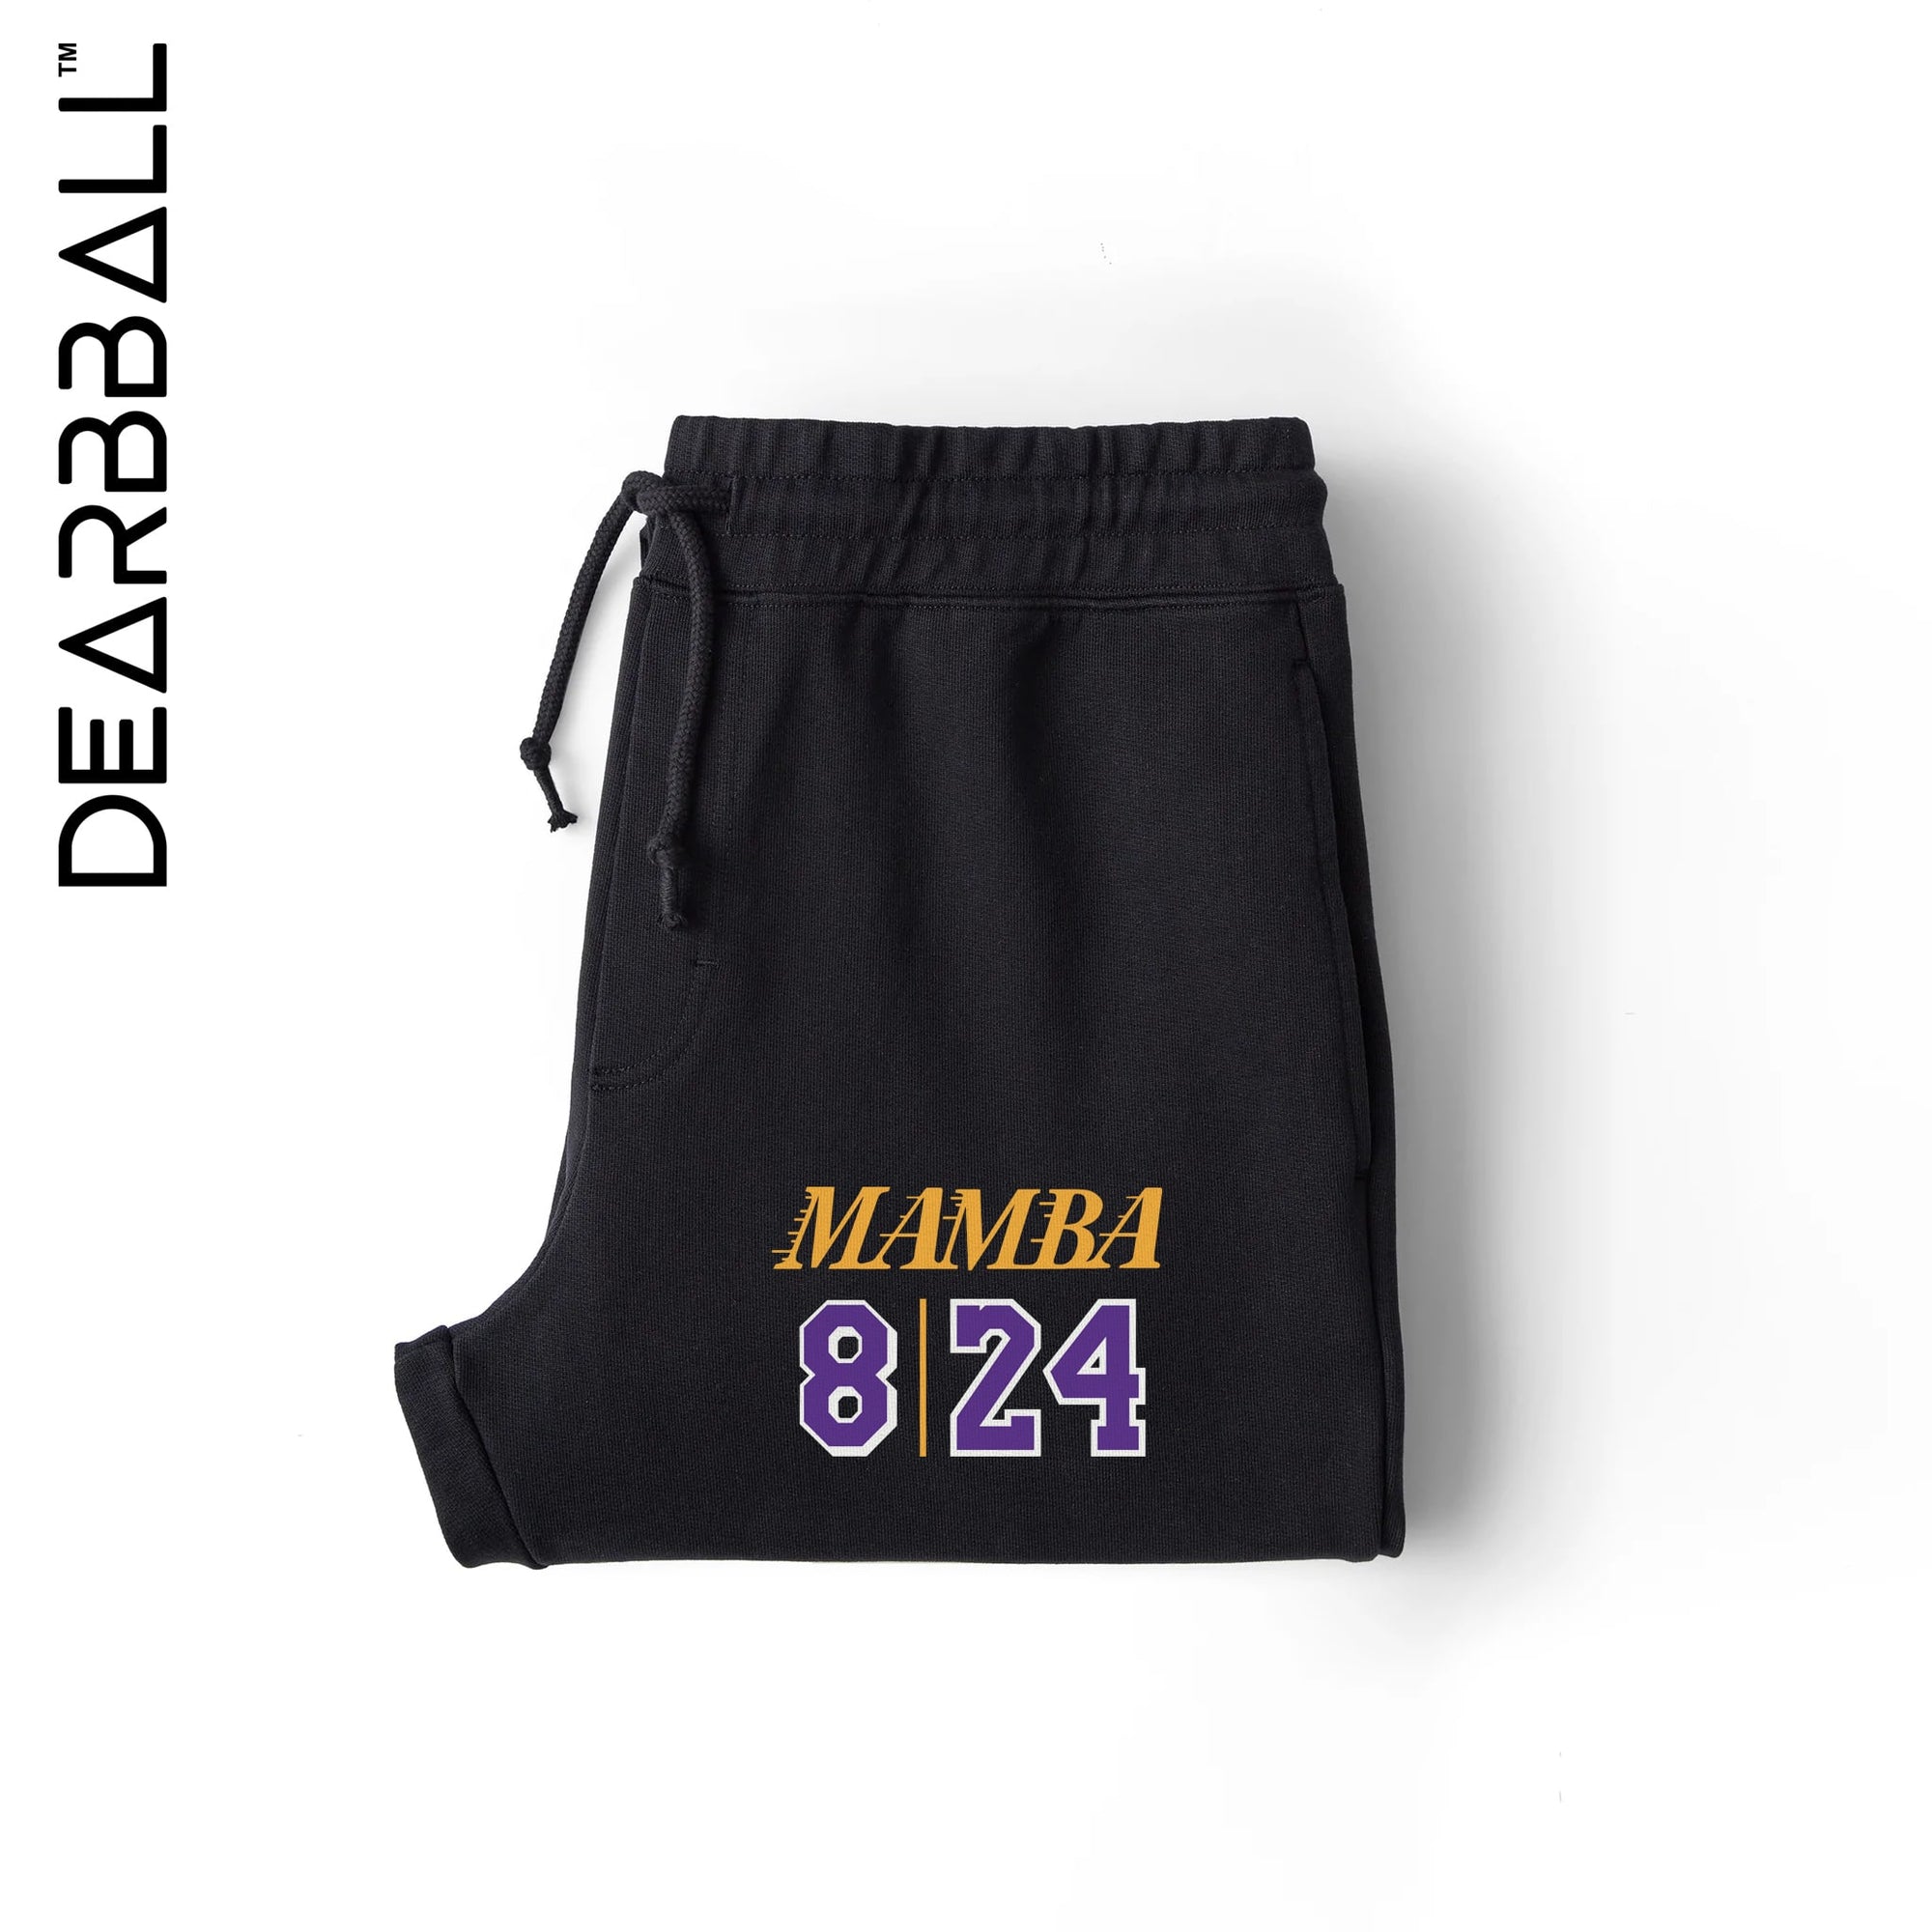 DEARBBALL SHORTS LOS ANGELES - LA 24 8 INFINITY LIMITED EDITION